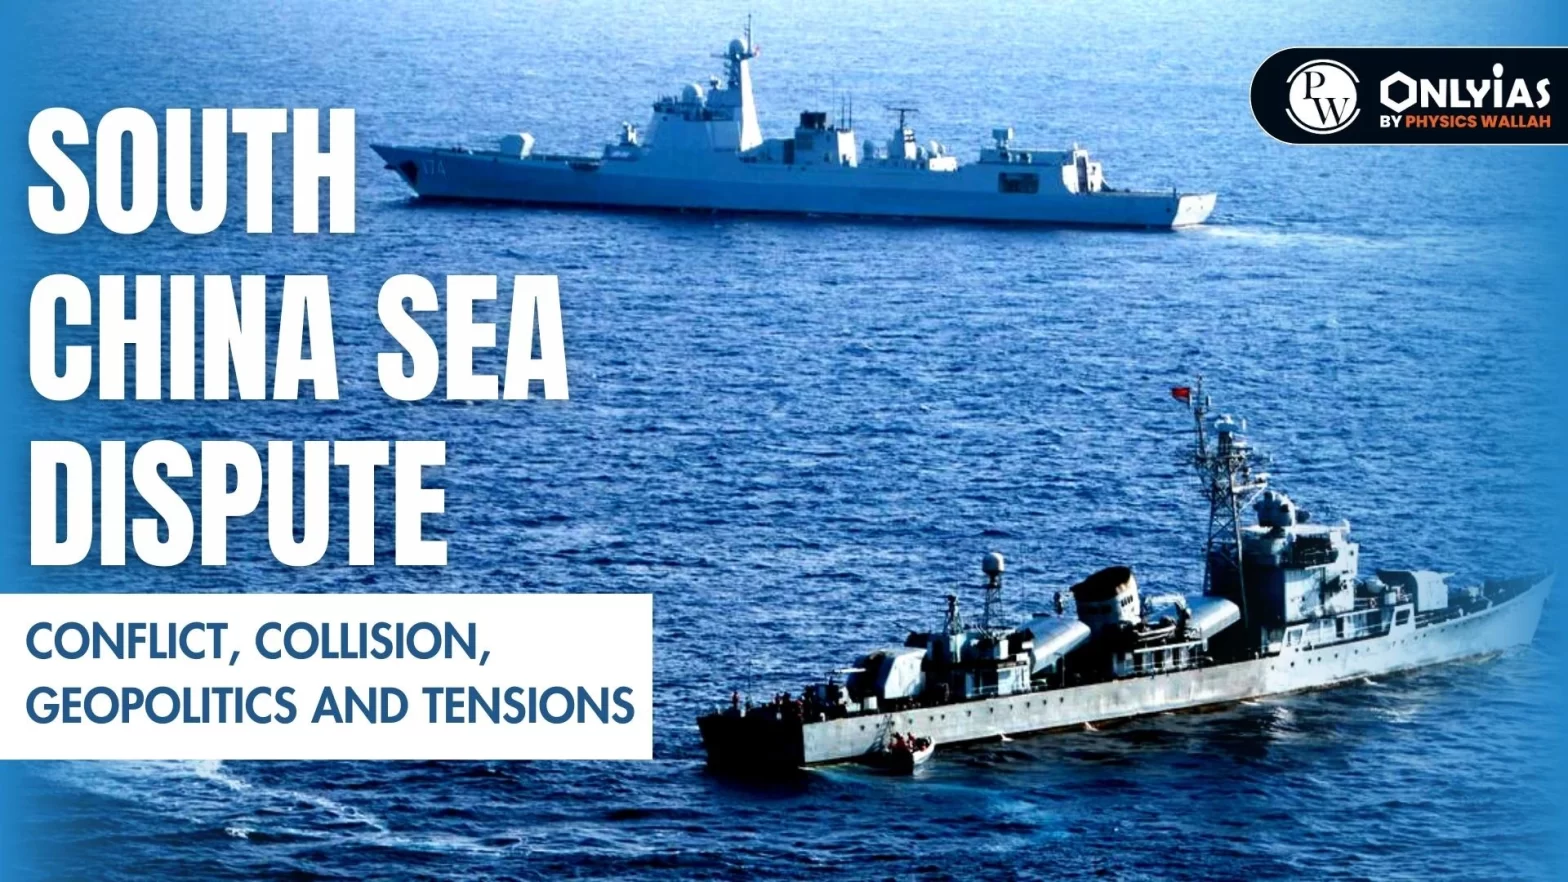 South China Sea Dispute: Conflict, Collision, Geopolitics and Tensions